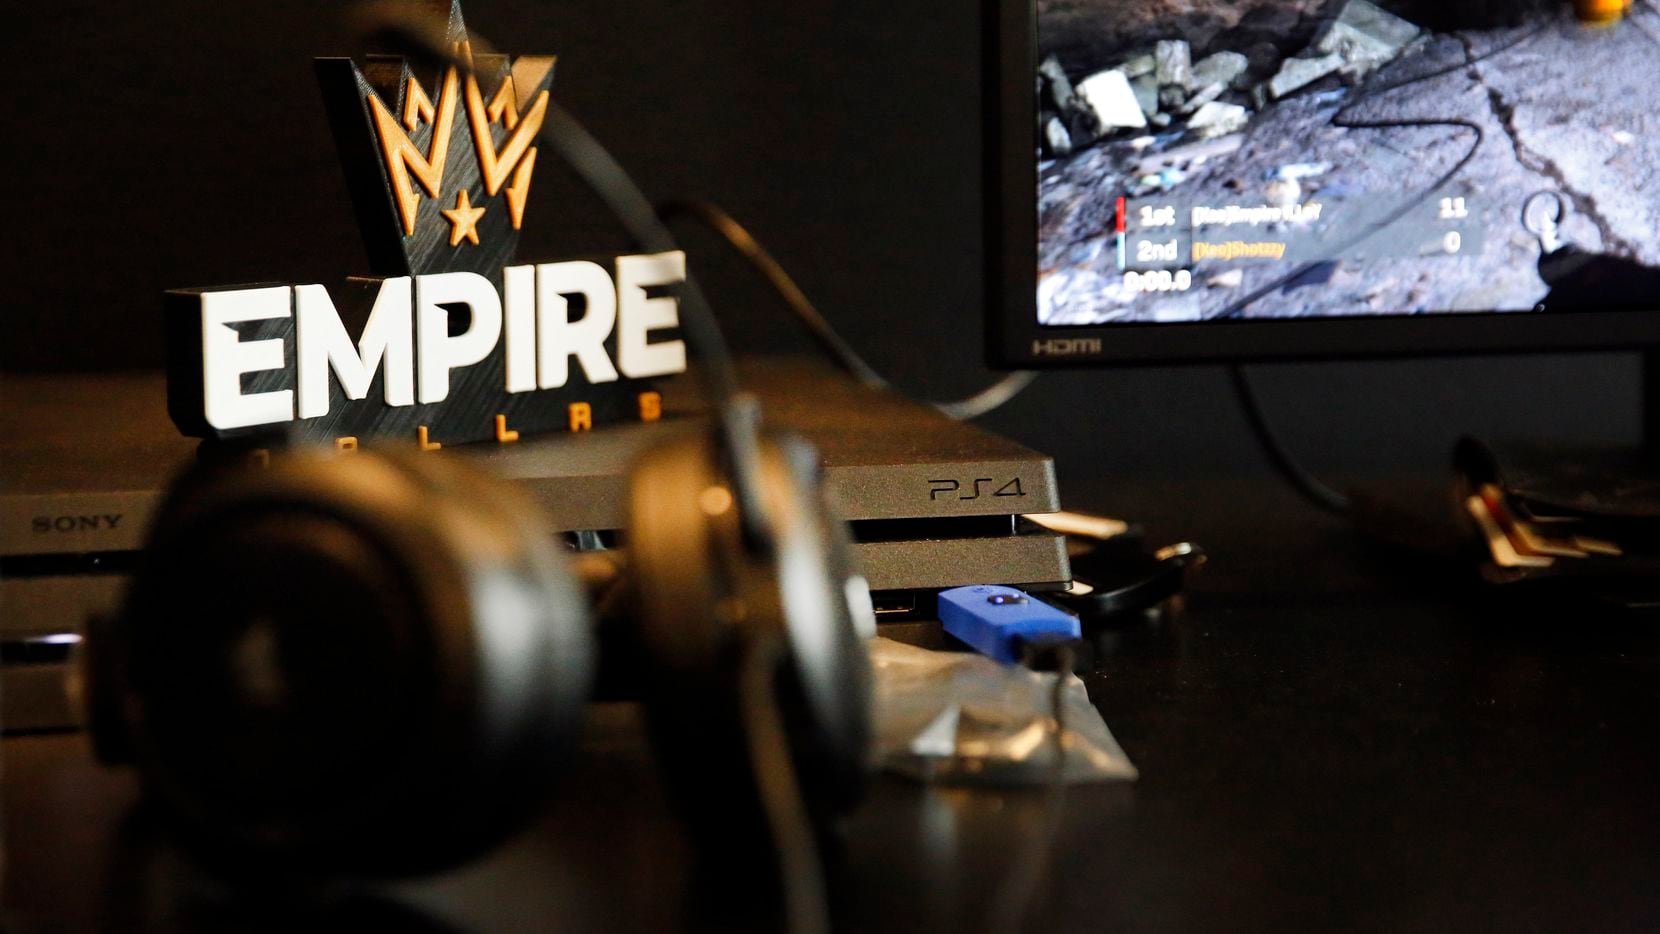 Dallas Empire, a new Call of Duty League franchise, is setting up their new Dallas offices in Victory Park, Wednesday, January 15, 2020. The team of 7 began practice this week in anticipation of the Jan. 24 season opener. (Tom Fox/The Dallas Morning News)